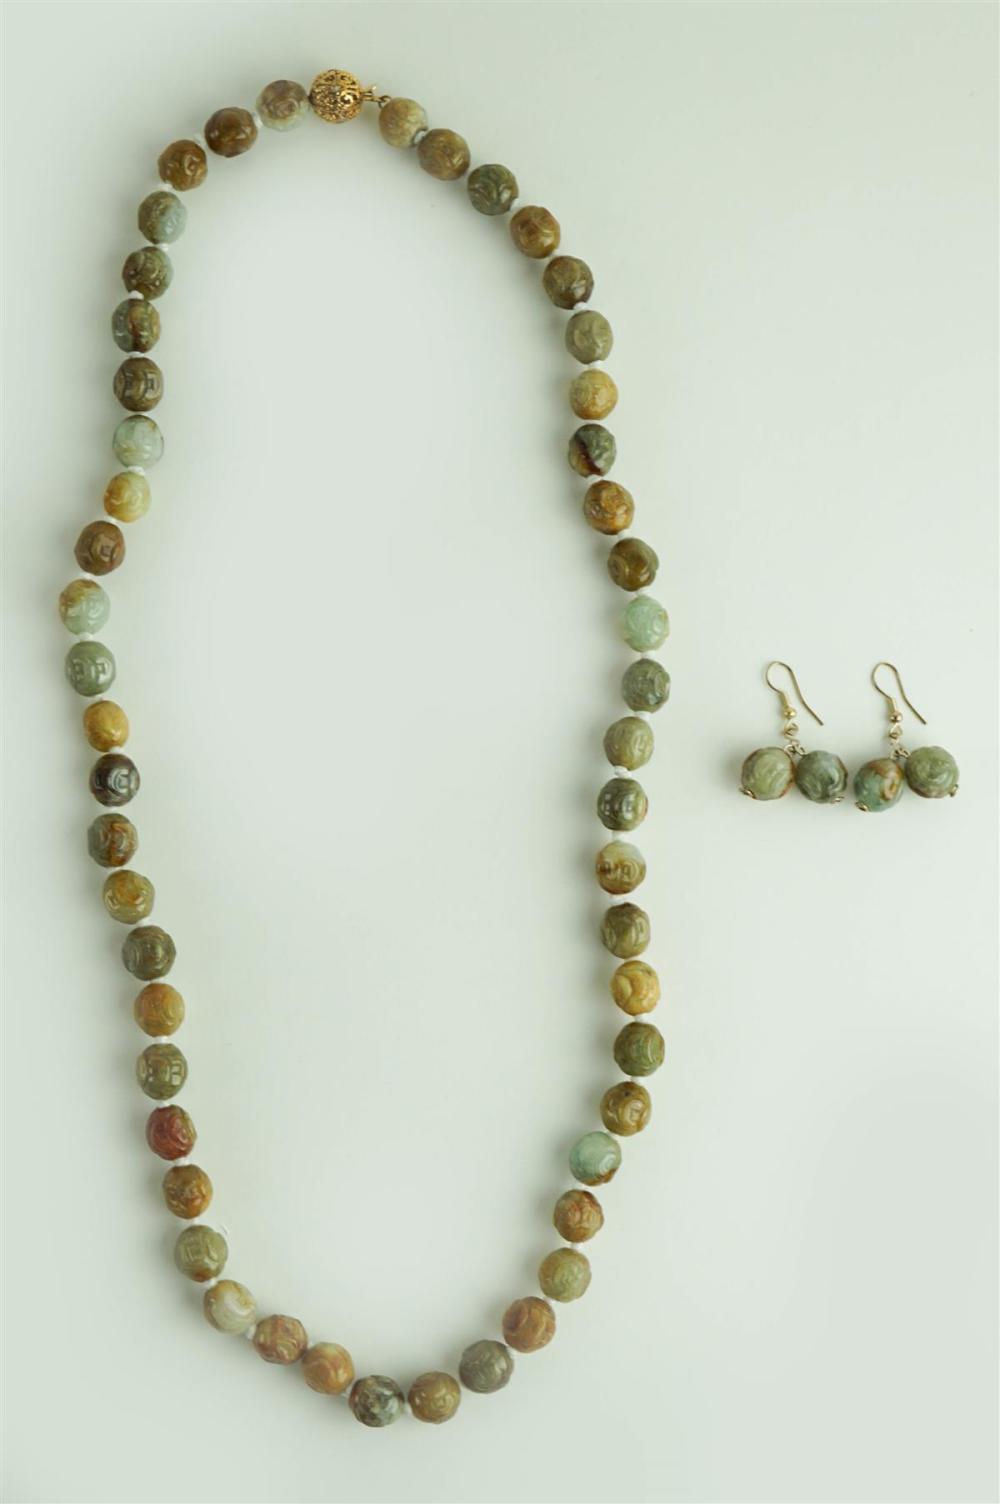 26 INCH AGATE BEAD NECKLACE AND